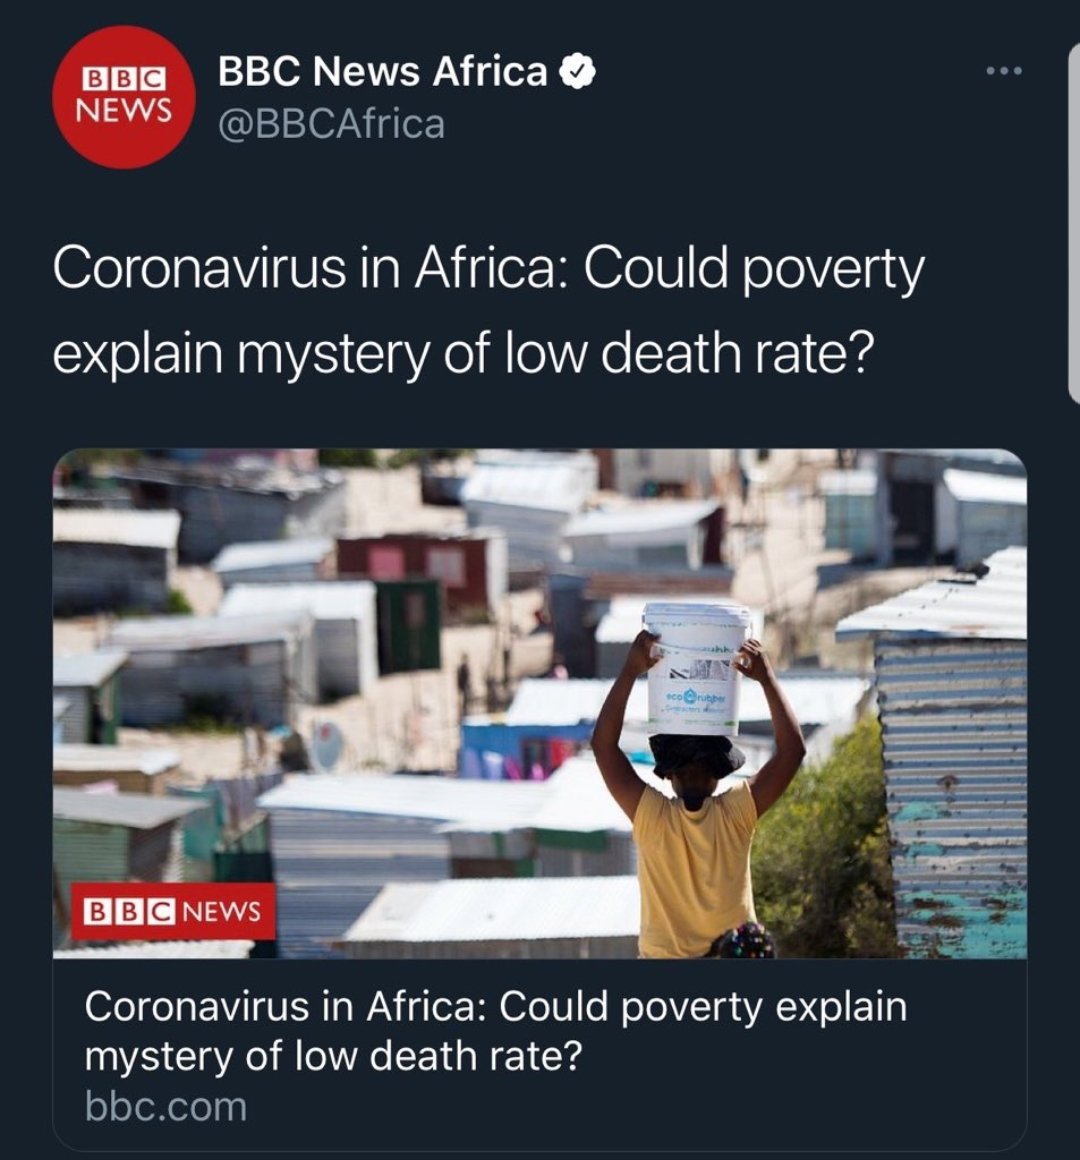 Now here we are! After a barrage of nonsensical headlines, off target predictions, etc, you're settling down to a hypothesis that poverty might explain the 'mystery' of low deaths! How desperate must you be to ignore evidence infront of you? I shd probably lower my expectations!